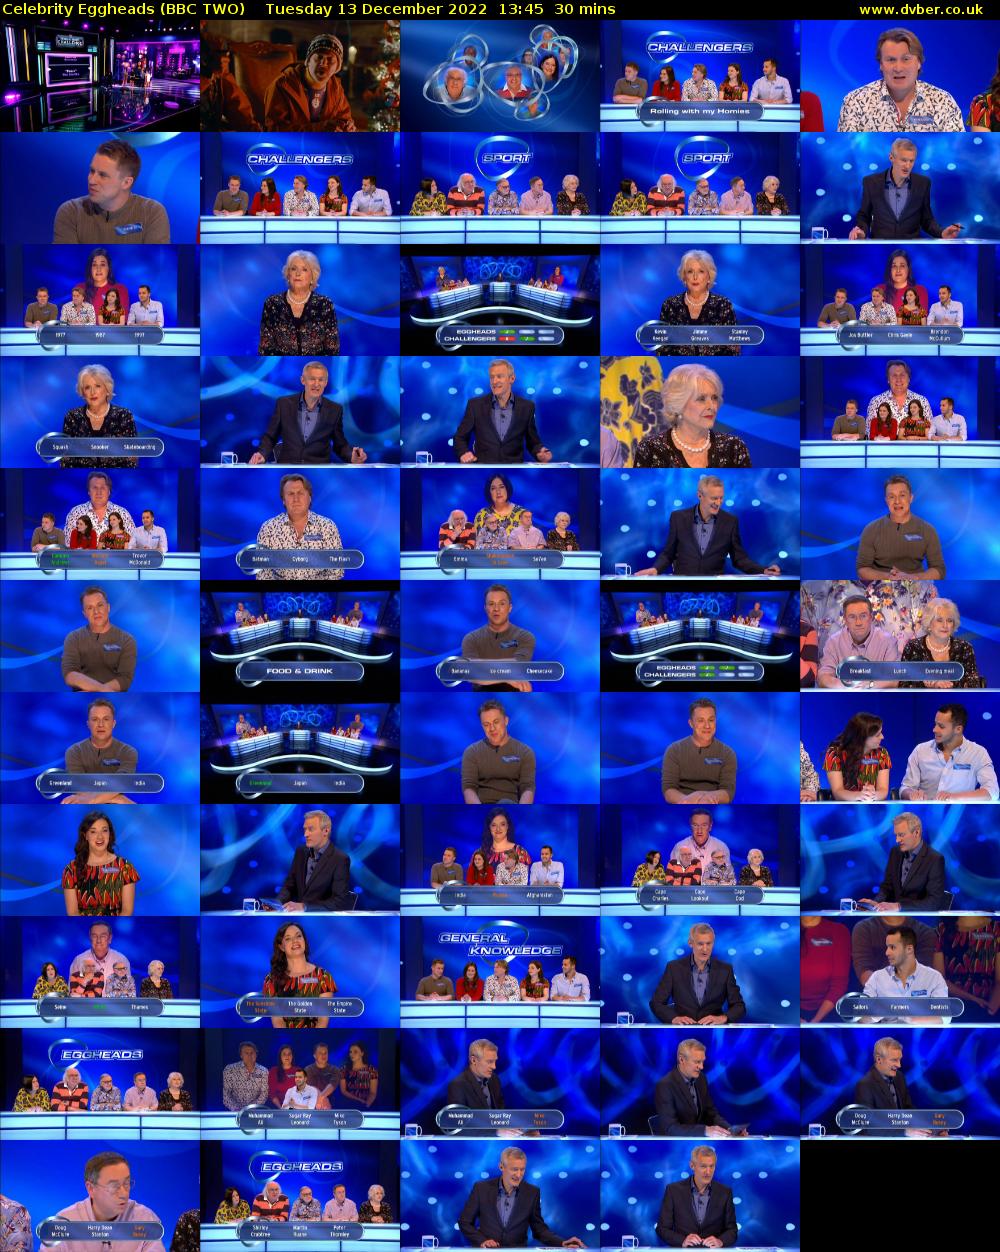 Celebrity Eggheads (BBC TWO) Tuesday 13 December 2022 13:45 - 14:15